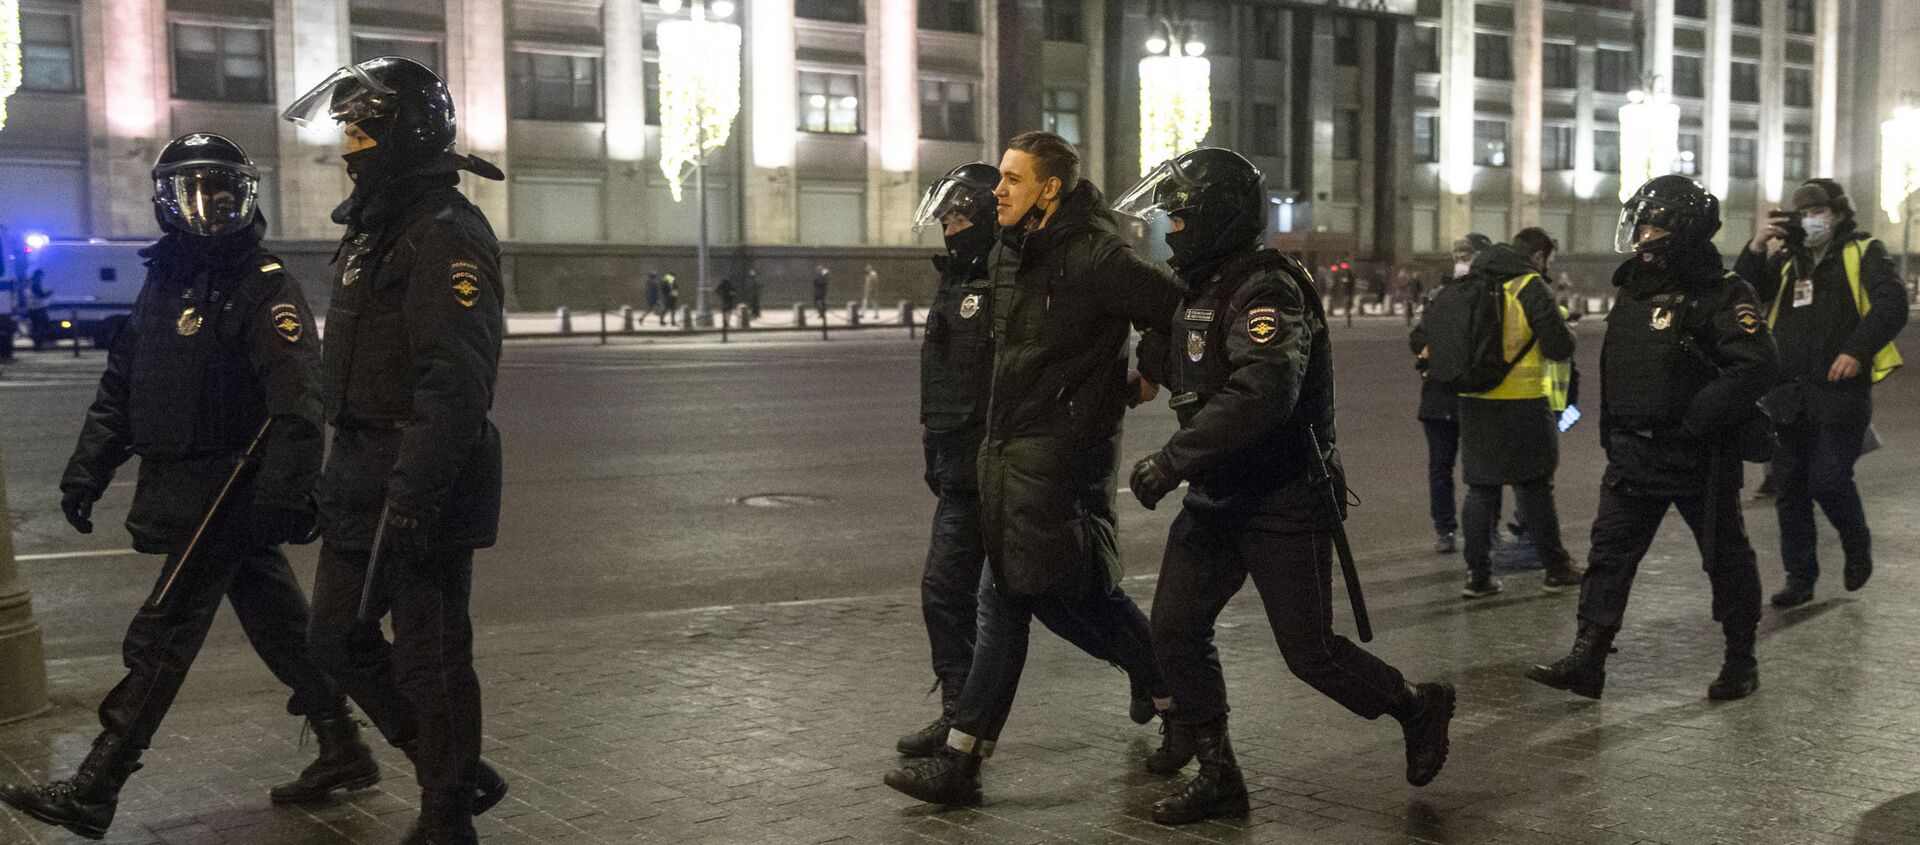 Police detain a man, with the the State Duma, the Lower House of the Russian Parliament, in the background in Moscow, Russia, Tuesday, Feb. 2, 2021. - Sputnik International, 1920, 07.02.2021